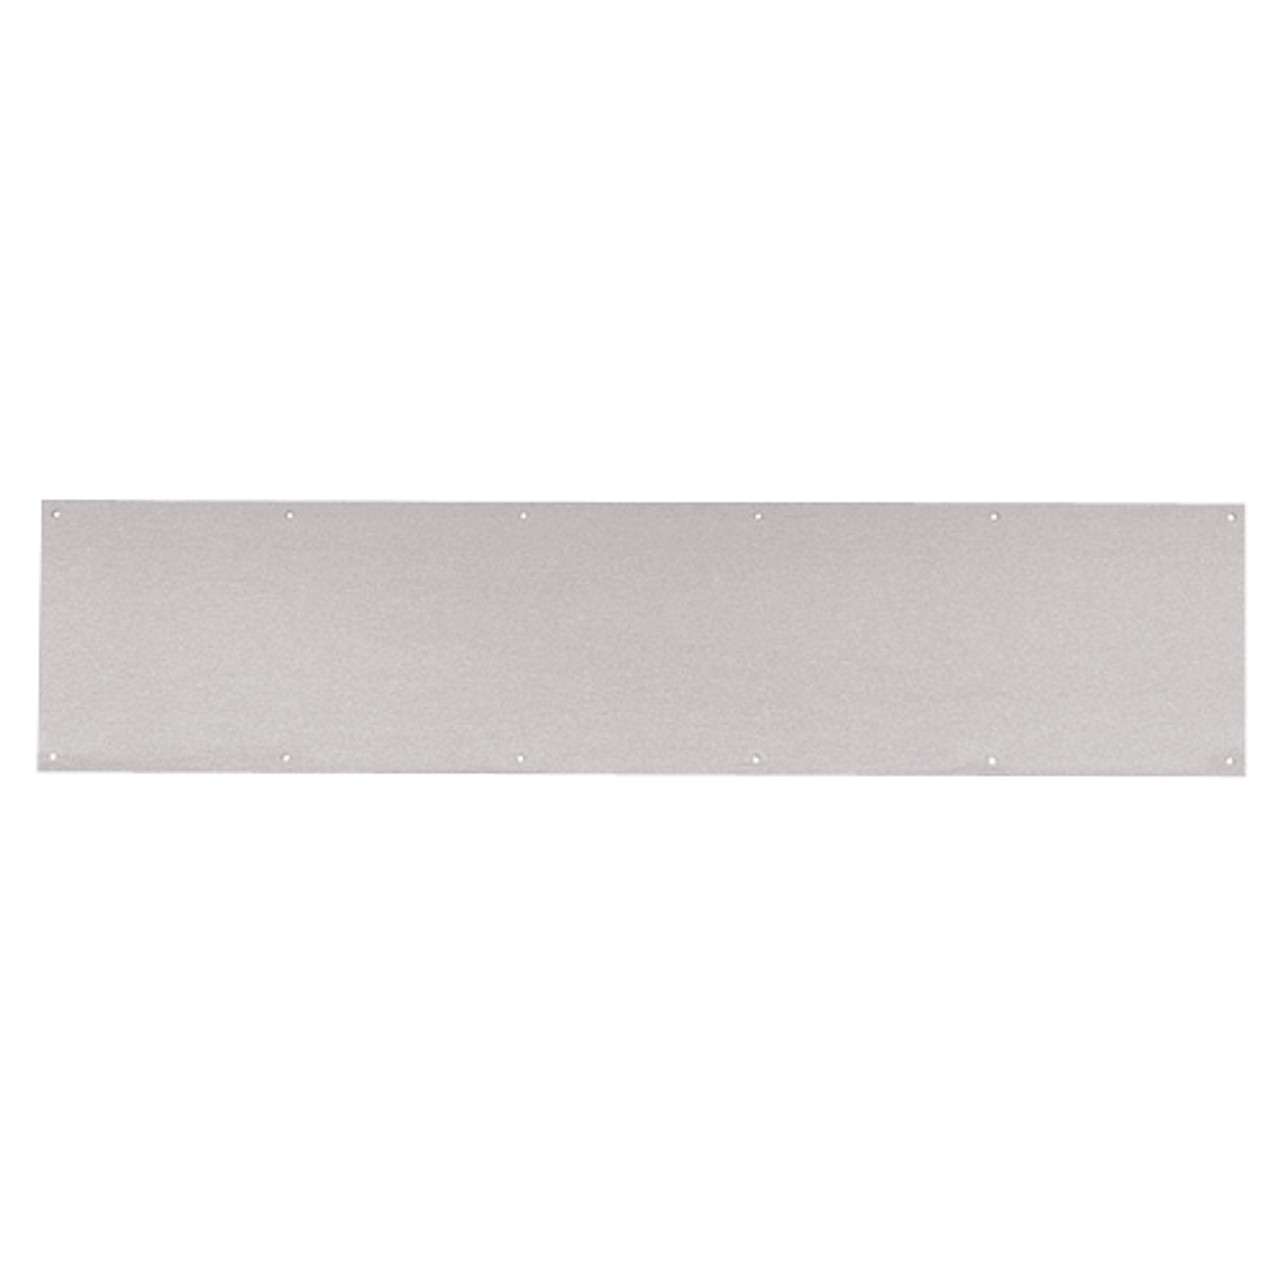 8400-US32D-5x20-B-CS Ives 8400 Series Protection Plate in Satin Stainless Steel